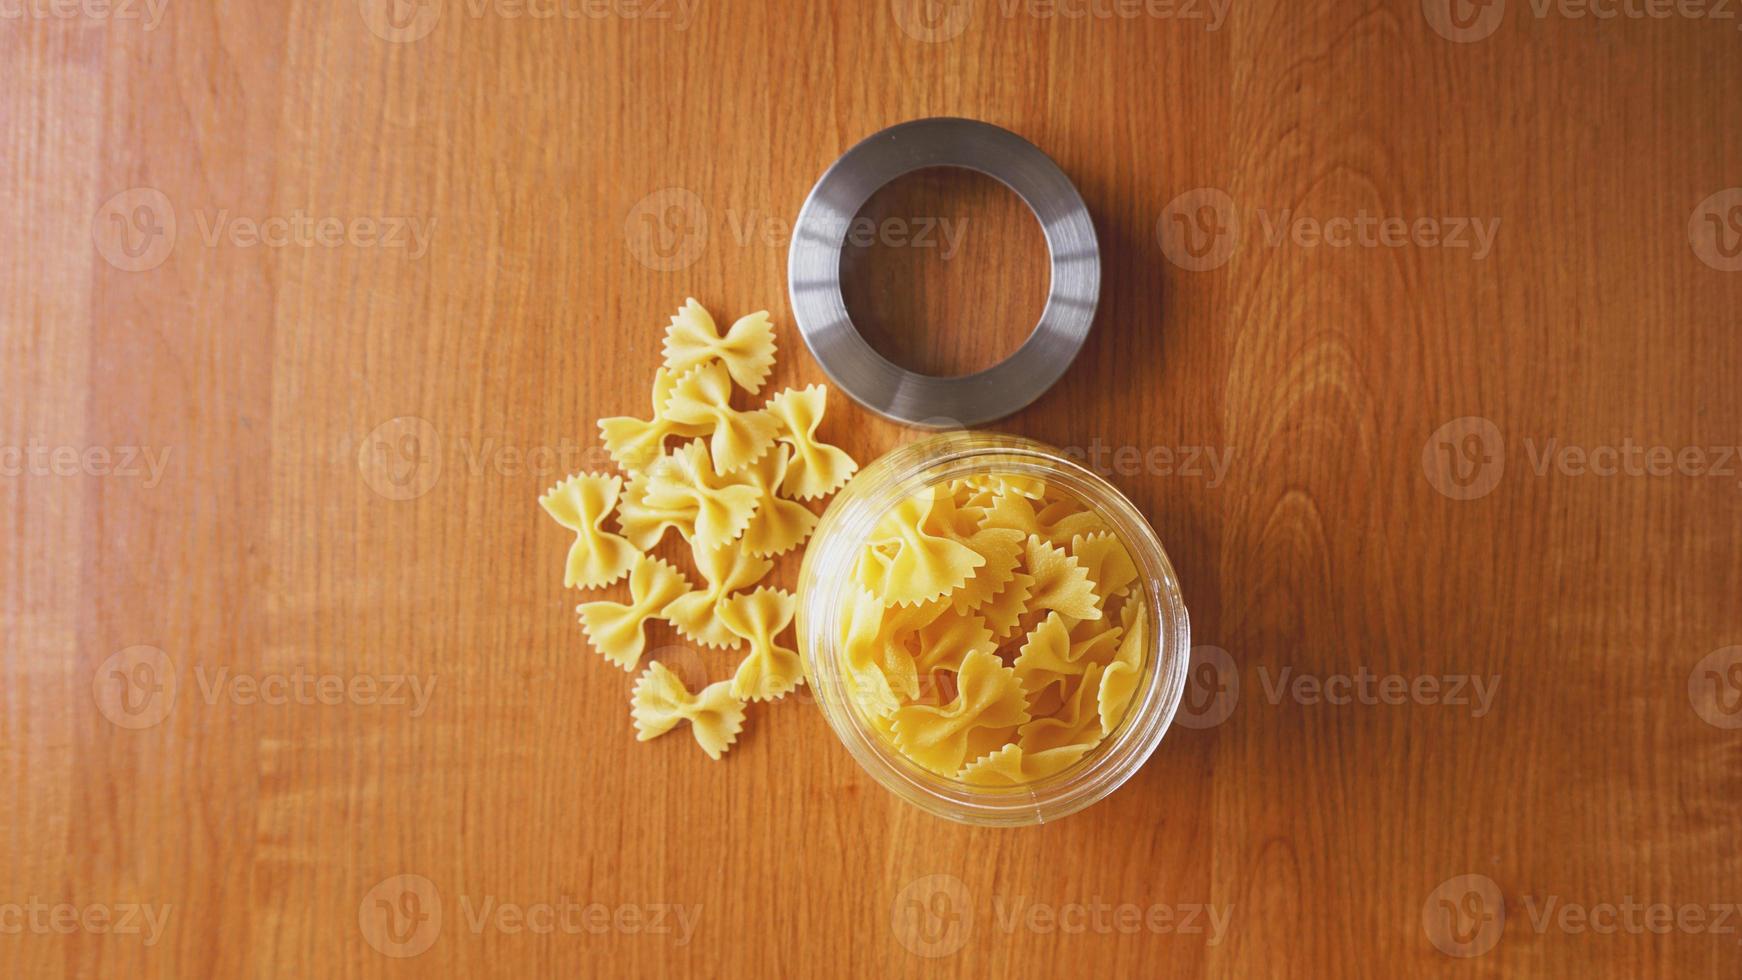 Pasta in the form of bows scattered from glass jar photo